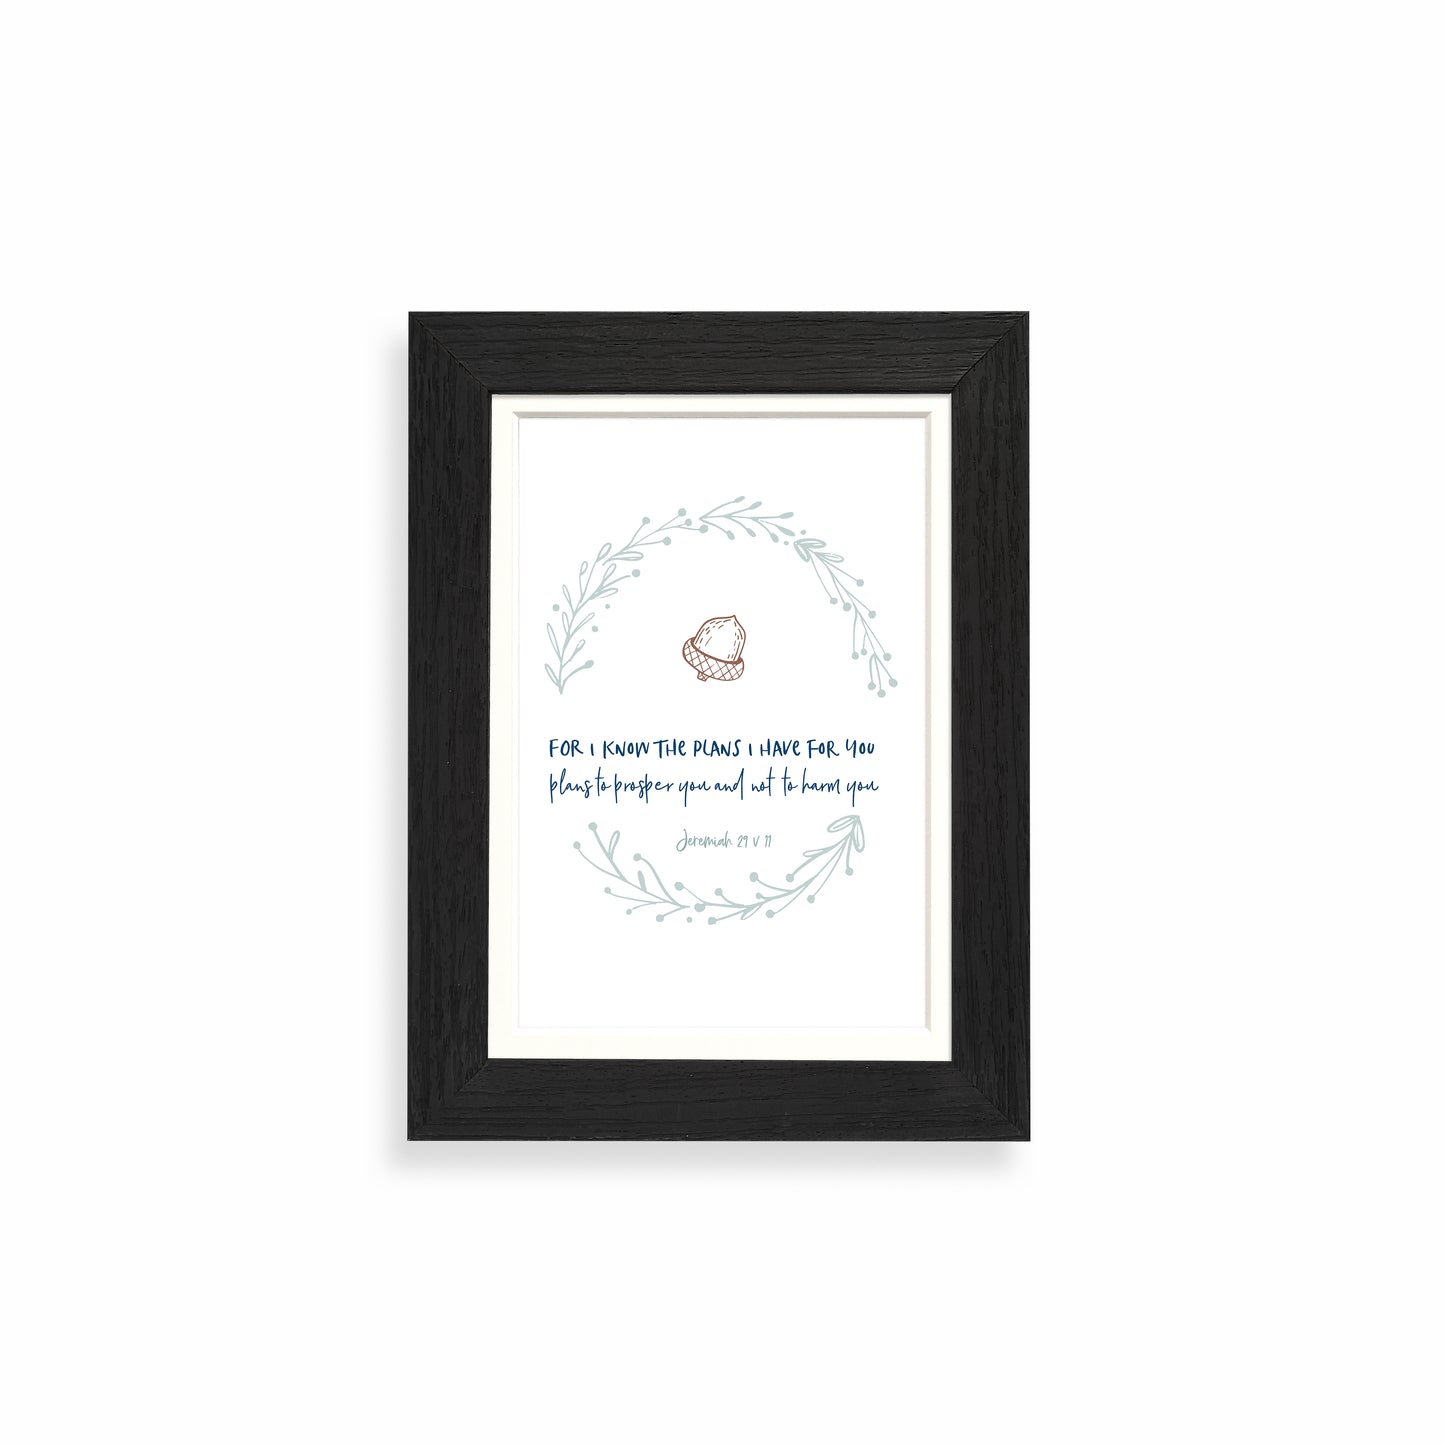 For I know the plans I have for you framed print